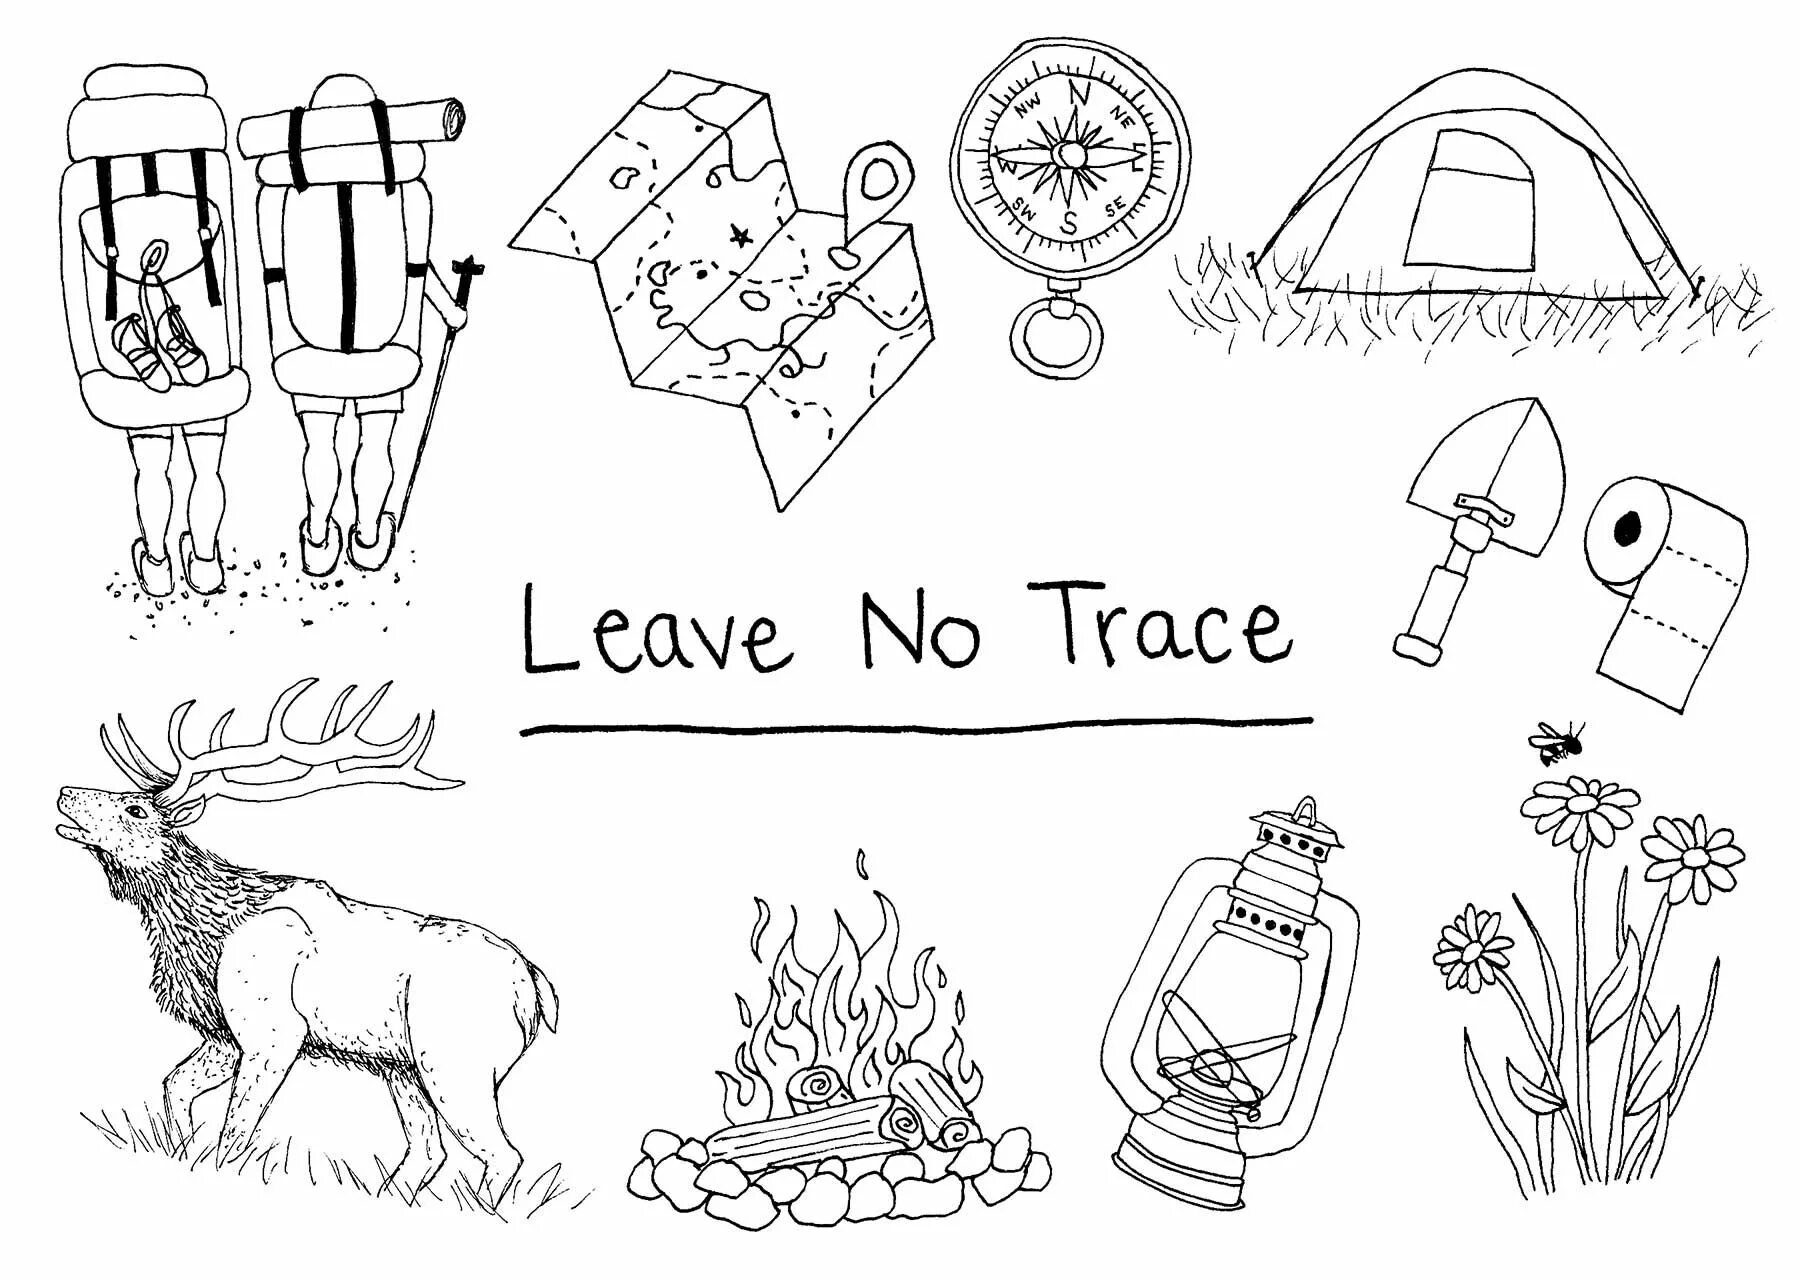 The camp left. Leave no Trace. Leave-no-Trace Camping. Things for Camping. Camping in English.